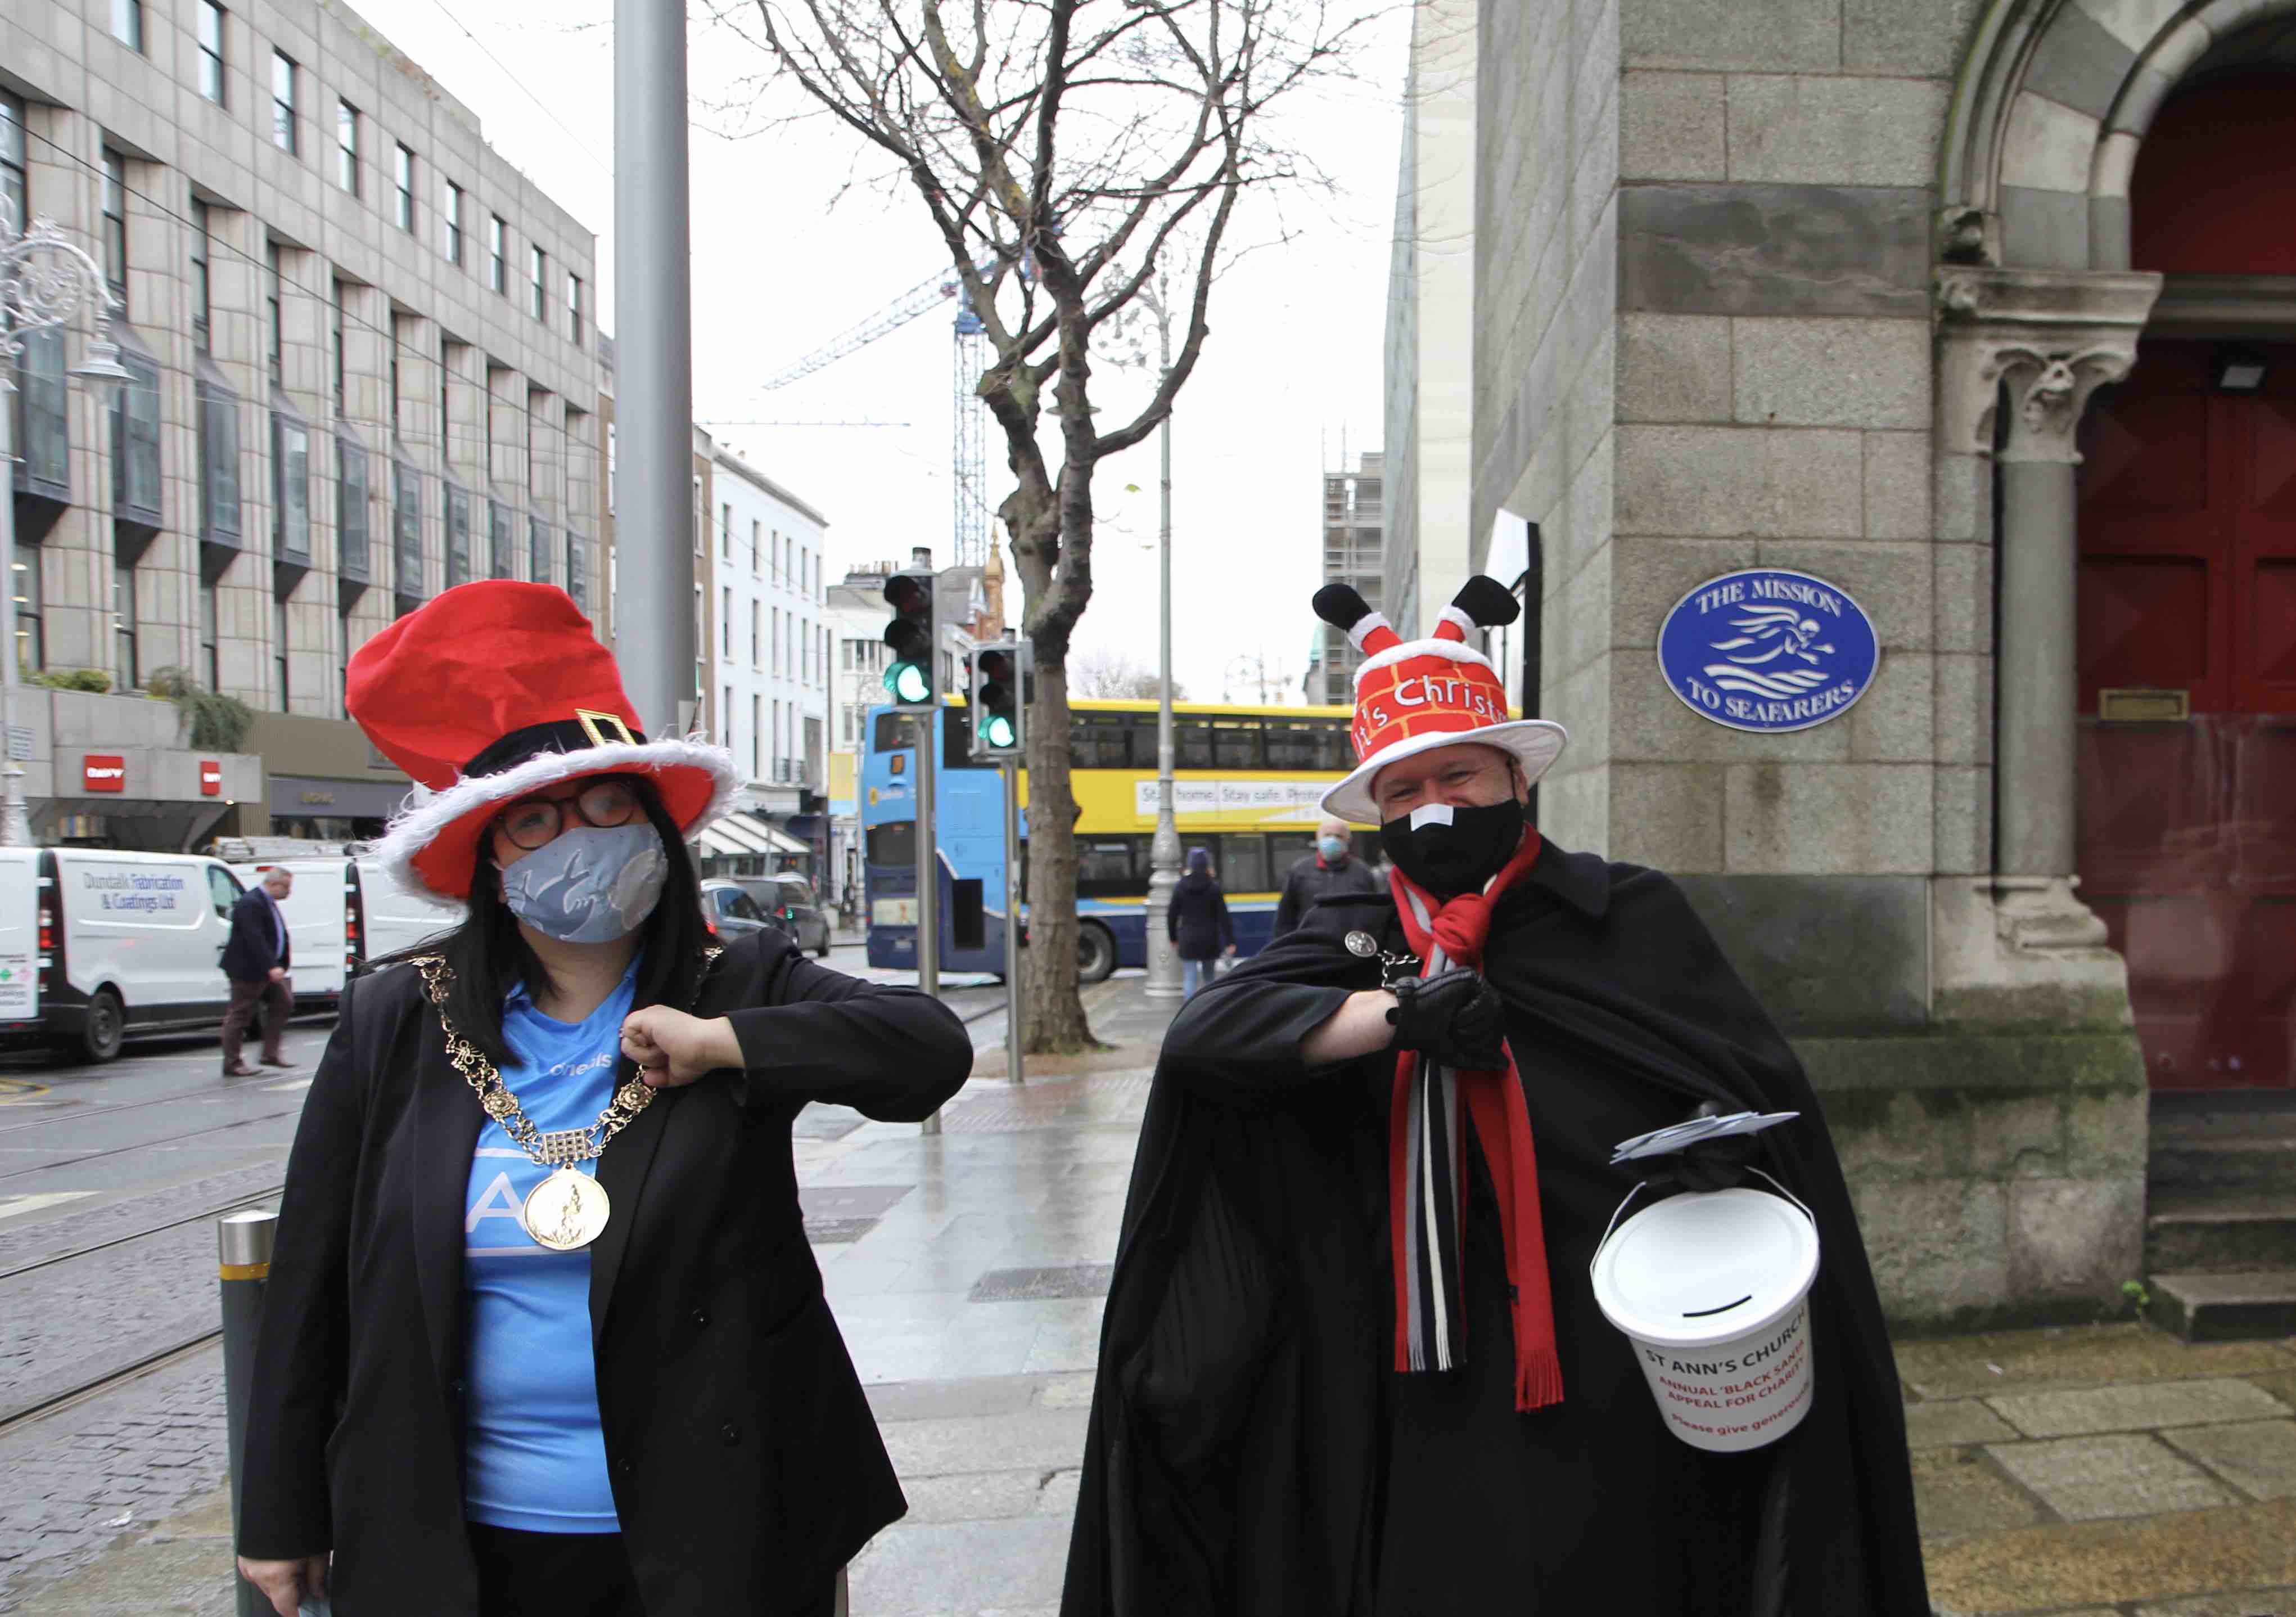 Lord Mayor Hazel Chu and Canon David Gillespie greet each other outside St Ann's Dawson Street at the launch of Black Santa 2020.